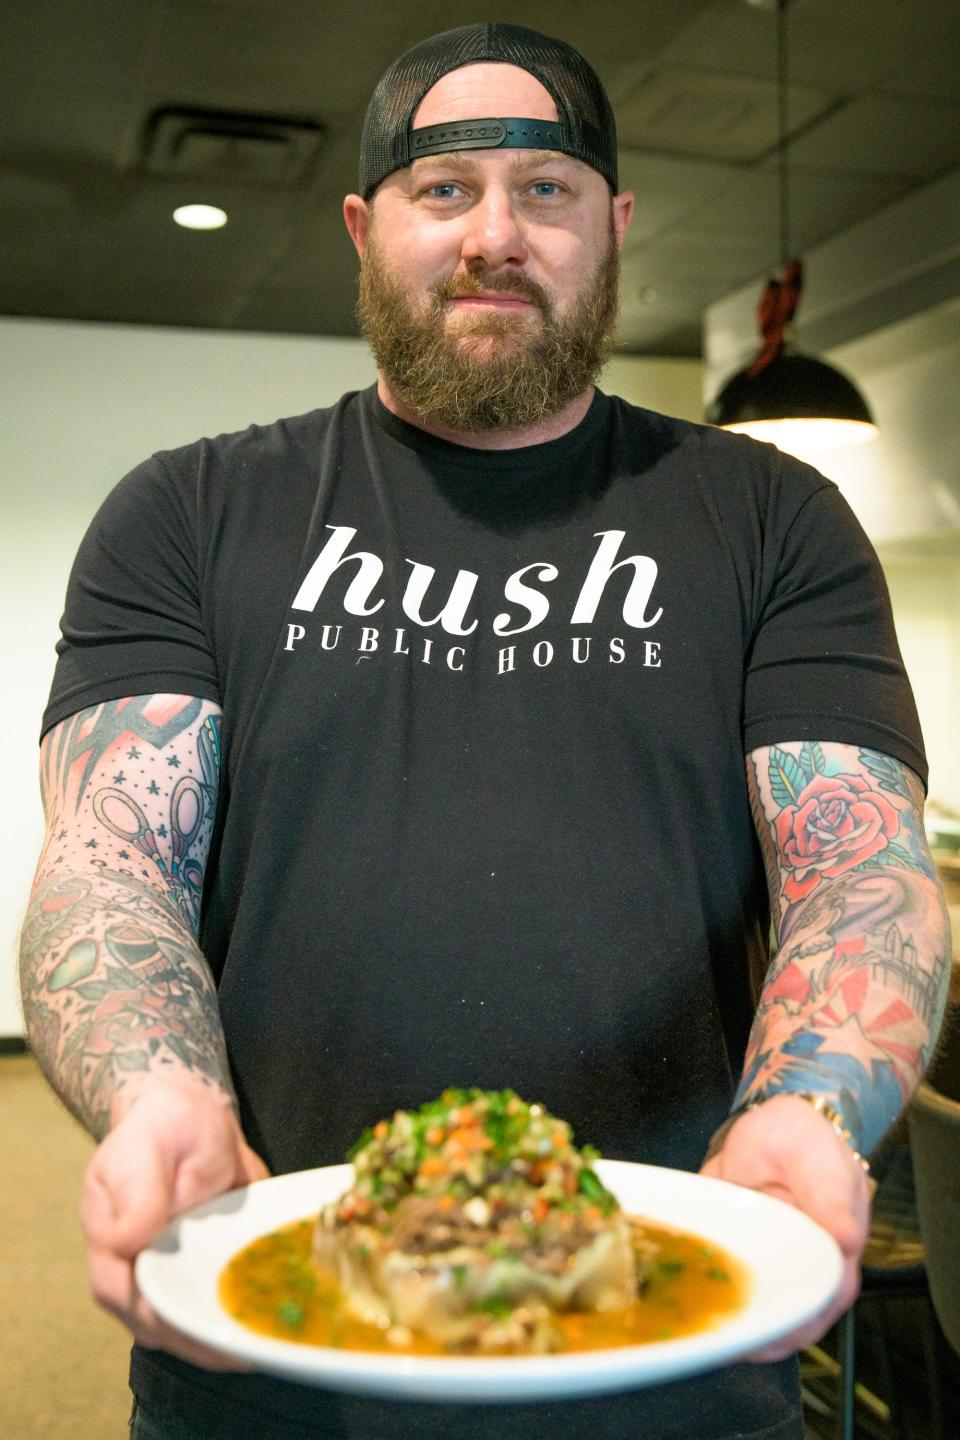 Owner and Chef Dom Ruggiero holding the Italian beef dish at Hush Public House in Scottsdale, Ariz. on Dec. 16, 2021.